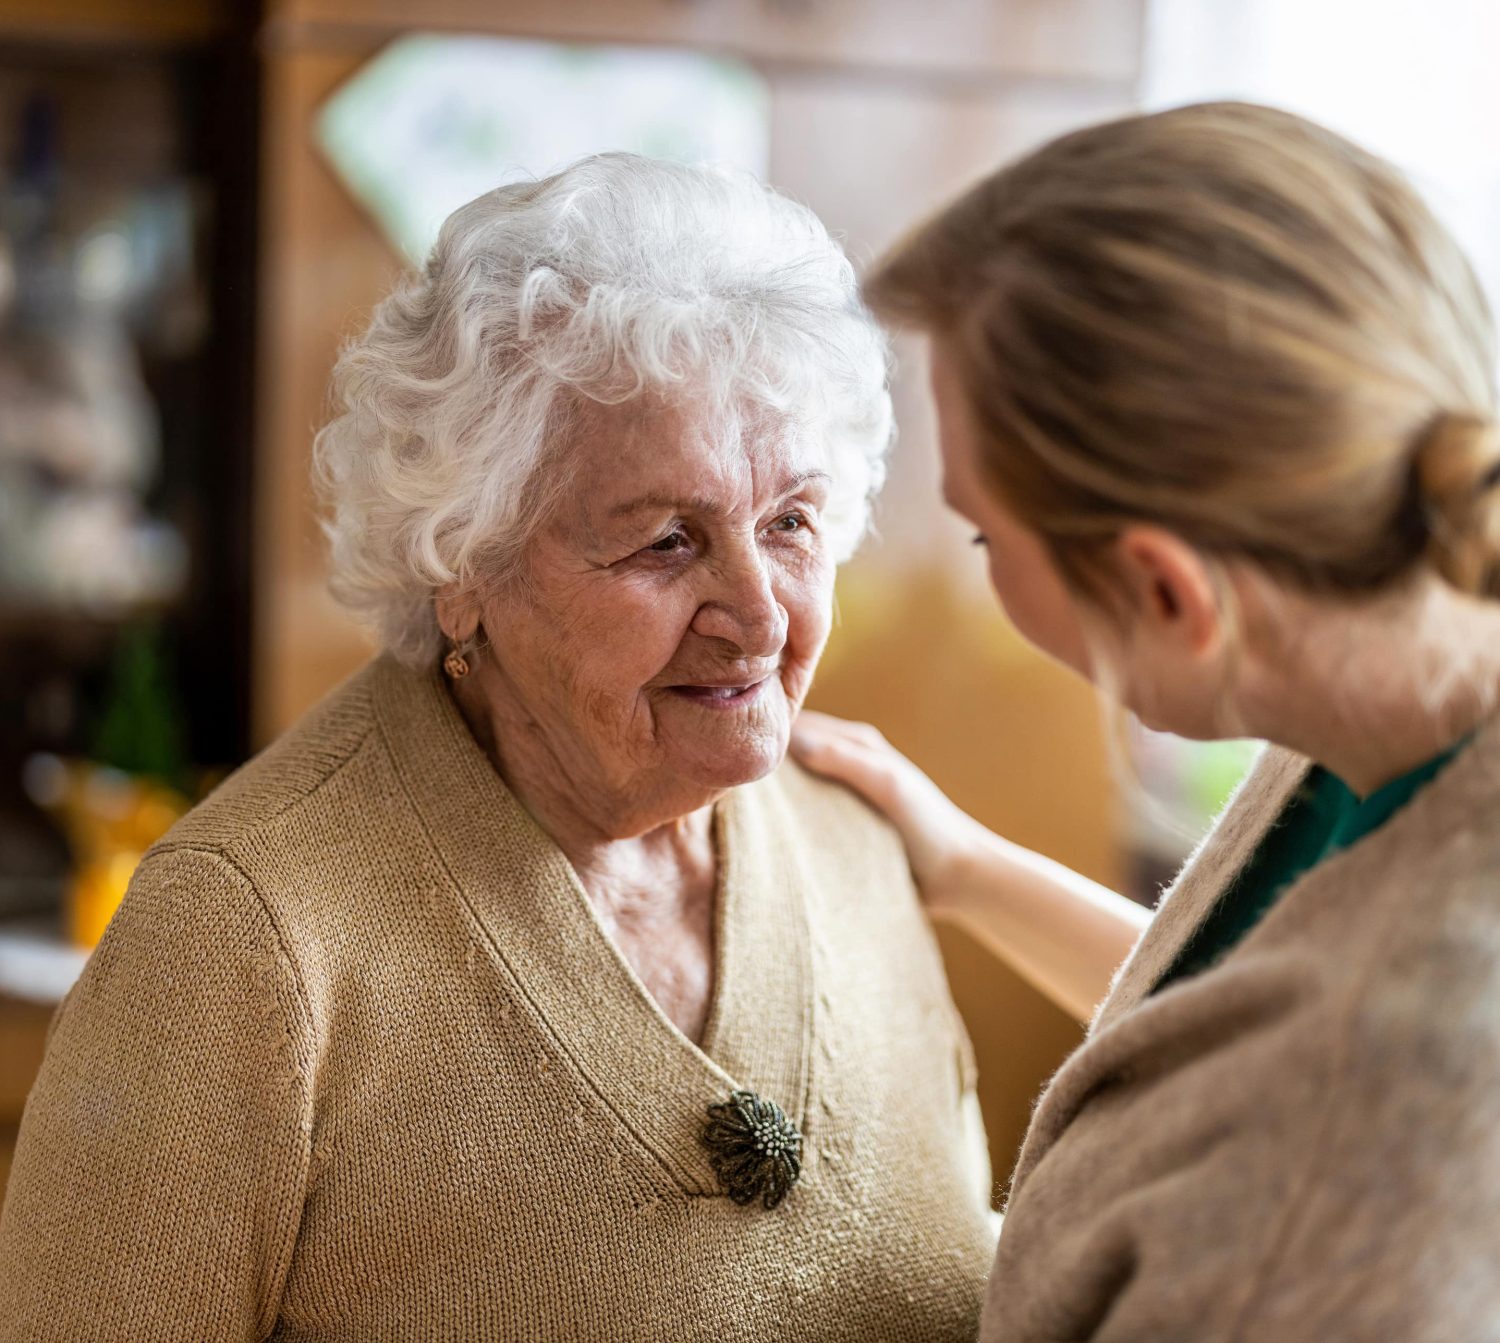 Female health visitor talking to a senior woman during home visit